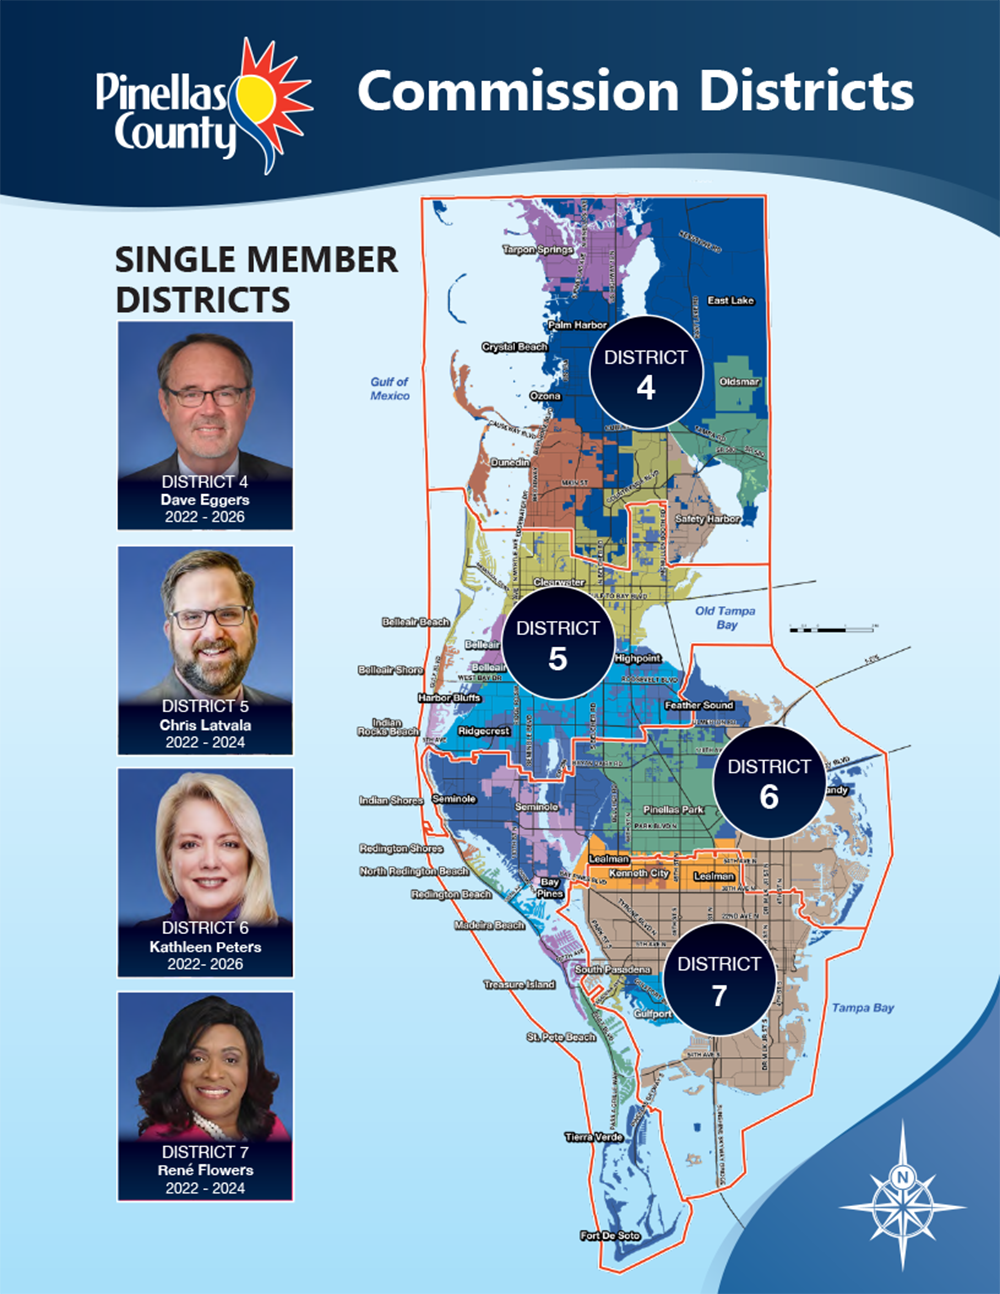 Single-member commission districts map with photos of Pinellas County Commissioners